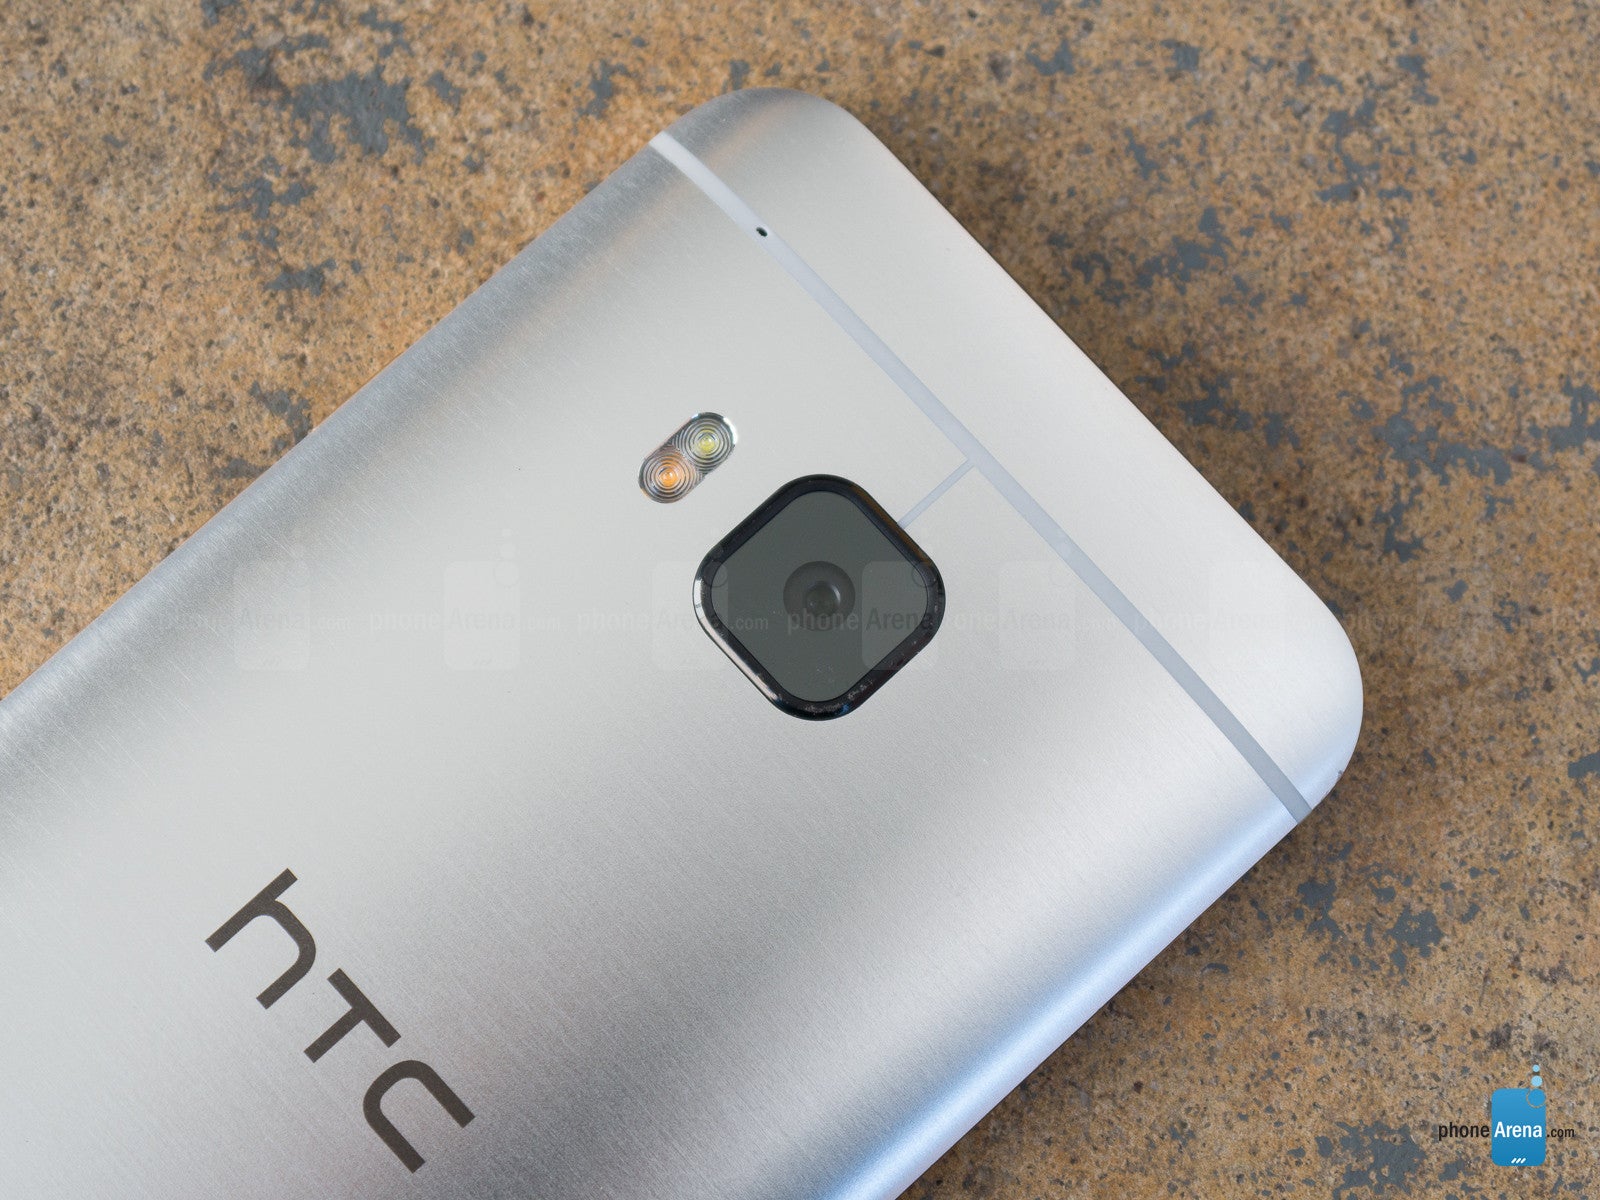 HTC One M9 - square pixels are not hip. - Evolutionary changes - how 2015's Android flagships pushed innovation without being revolutionary